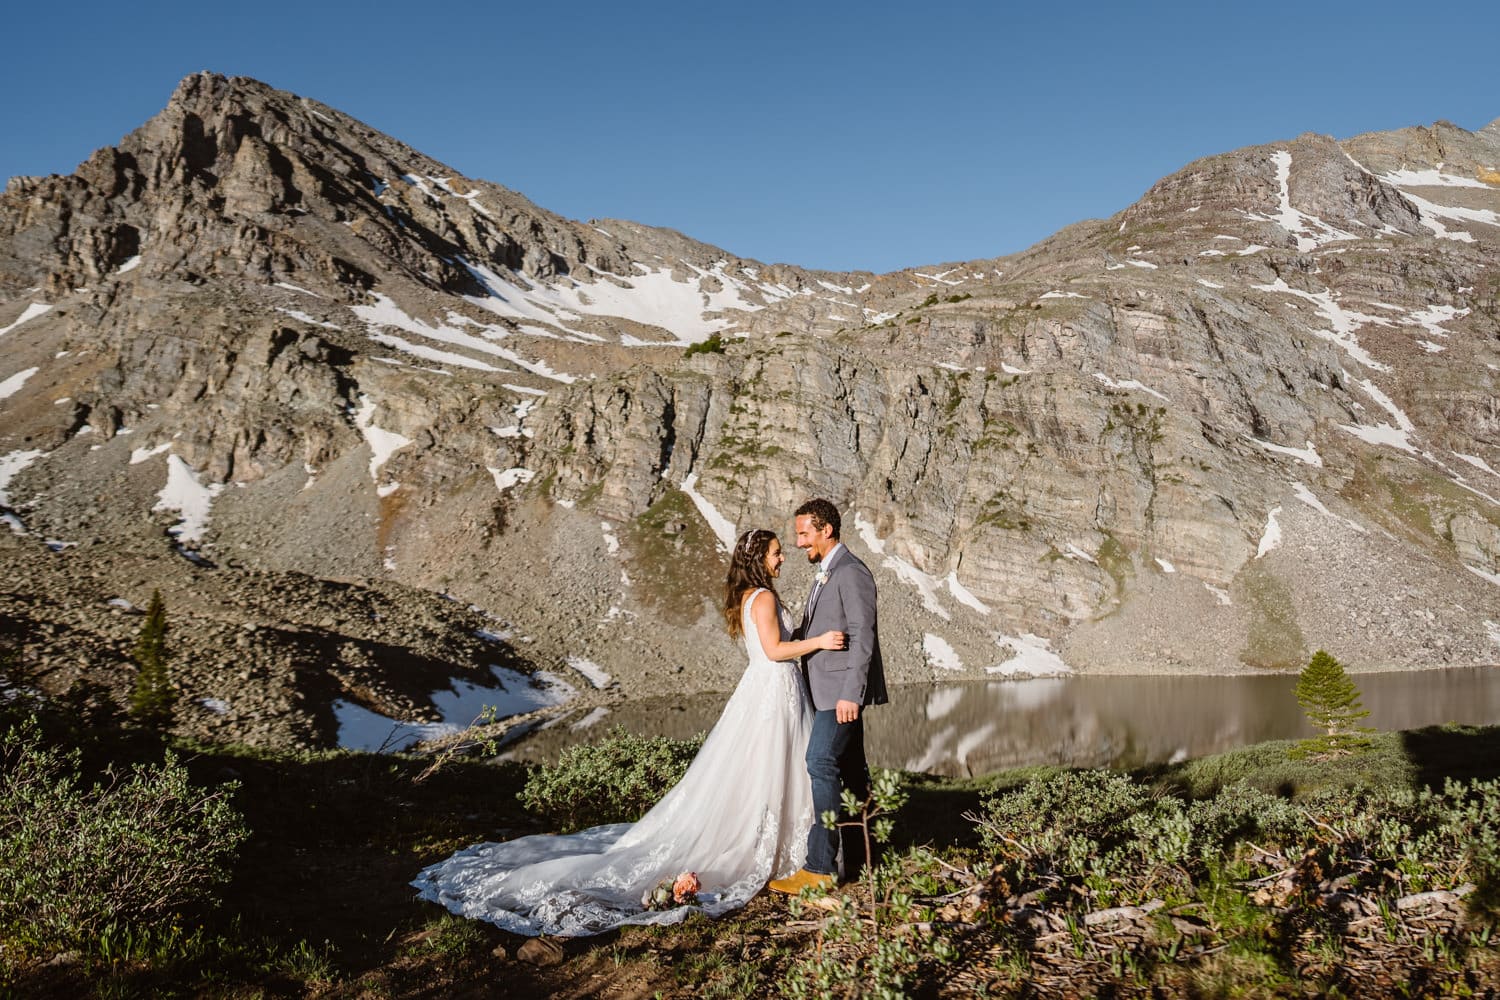 Bride and groom sharing a hug and laugh at an alpine lake in Colorado.